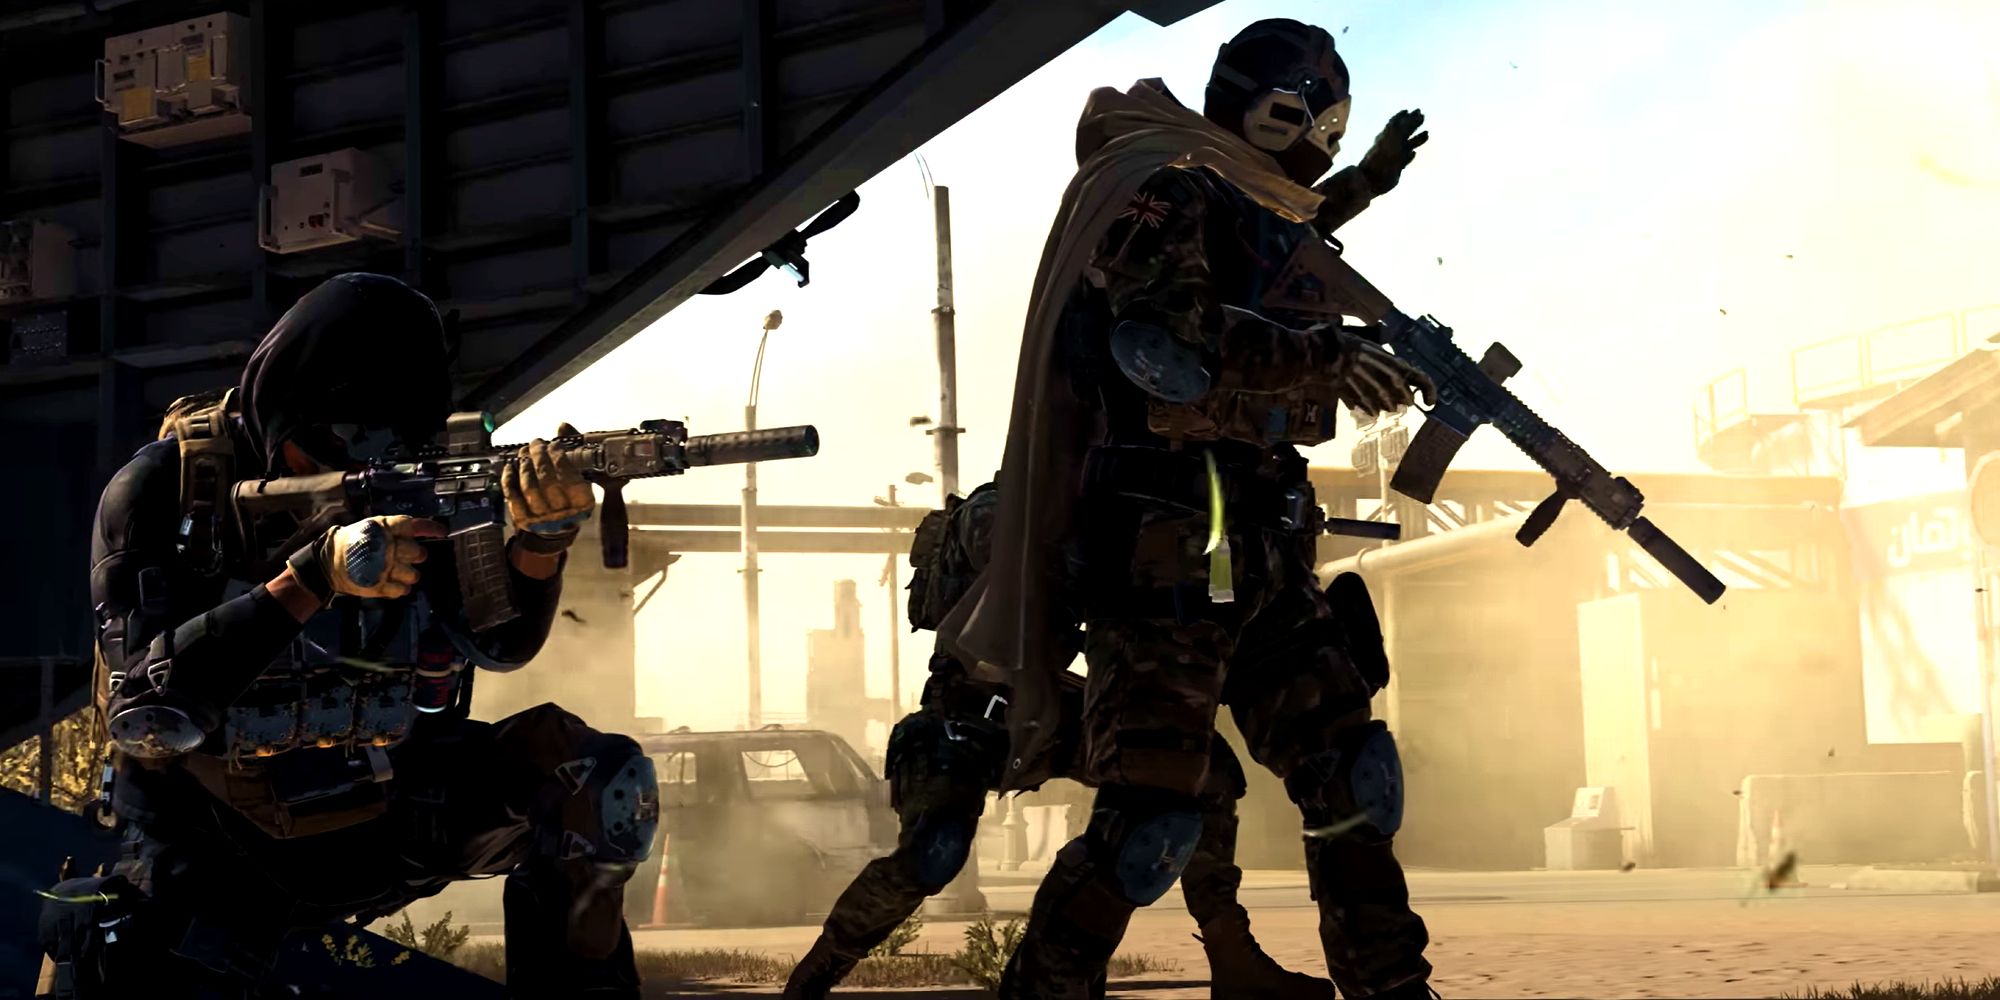 Image of three soldiers exiting a helicopter in Modern Warfare 2, guns drawn.